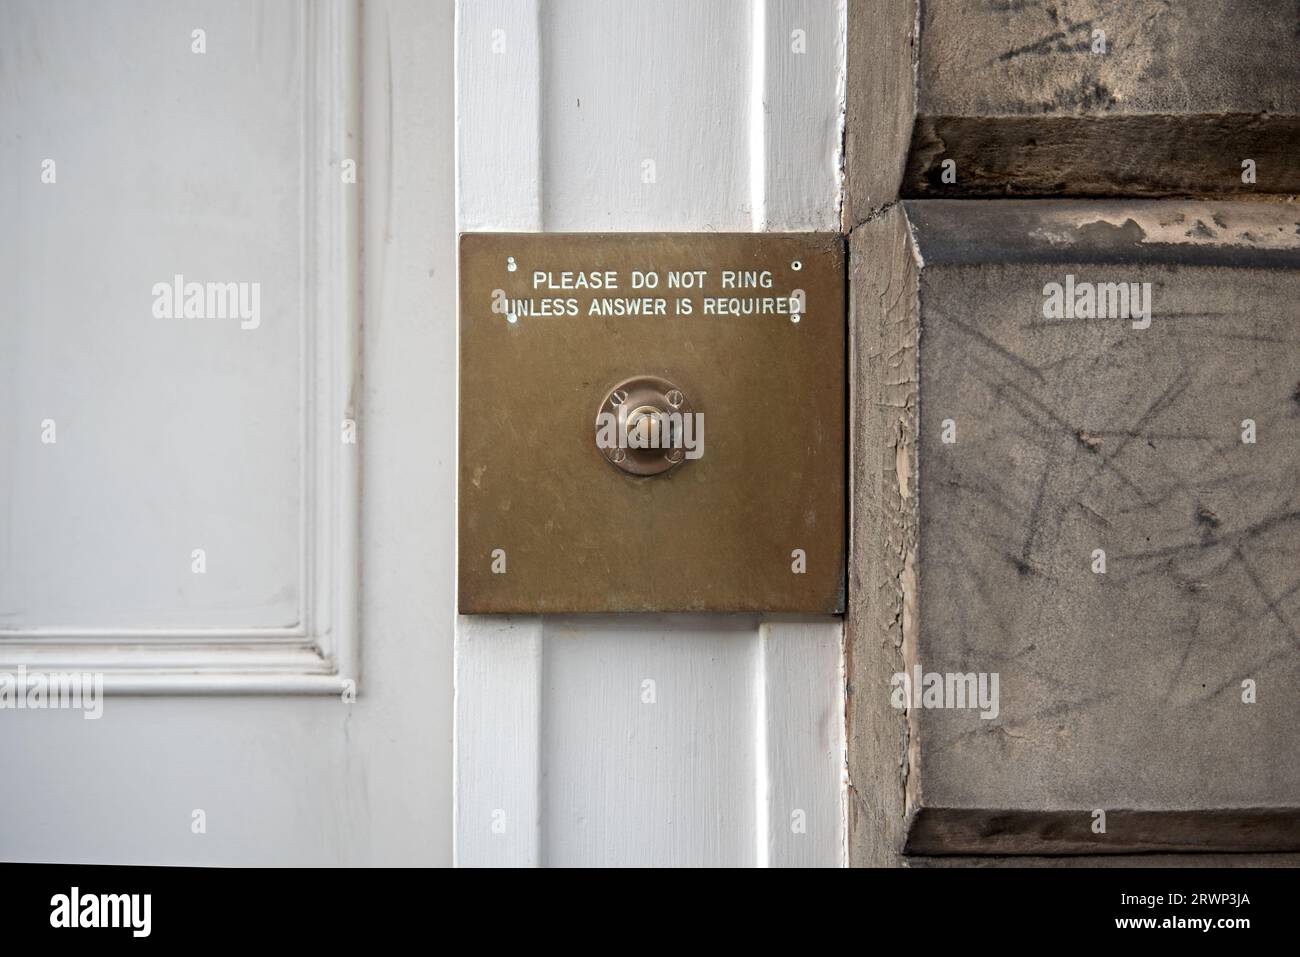 Quirky doorbell sign - Please Do Not Ring Unless Answer Is Required - on a brass by the door of a New Town property in Edinburgh, Scotland, UK. Stock Photo